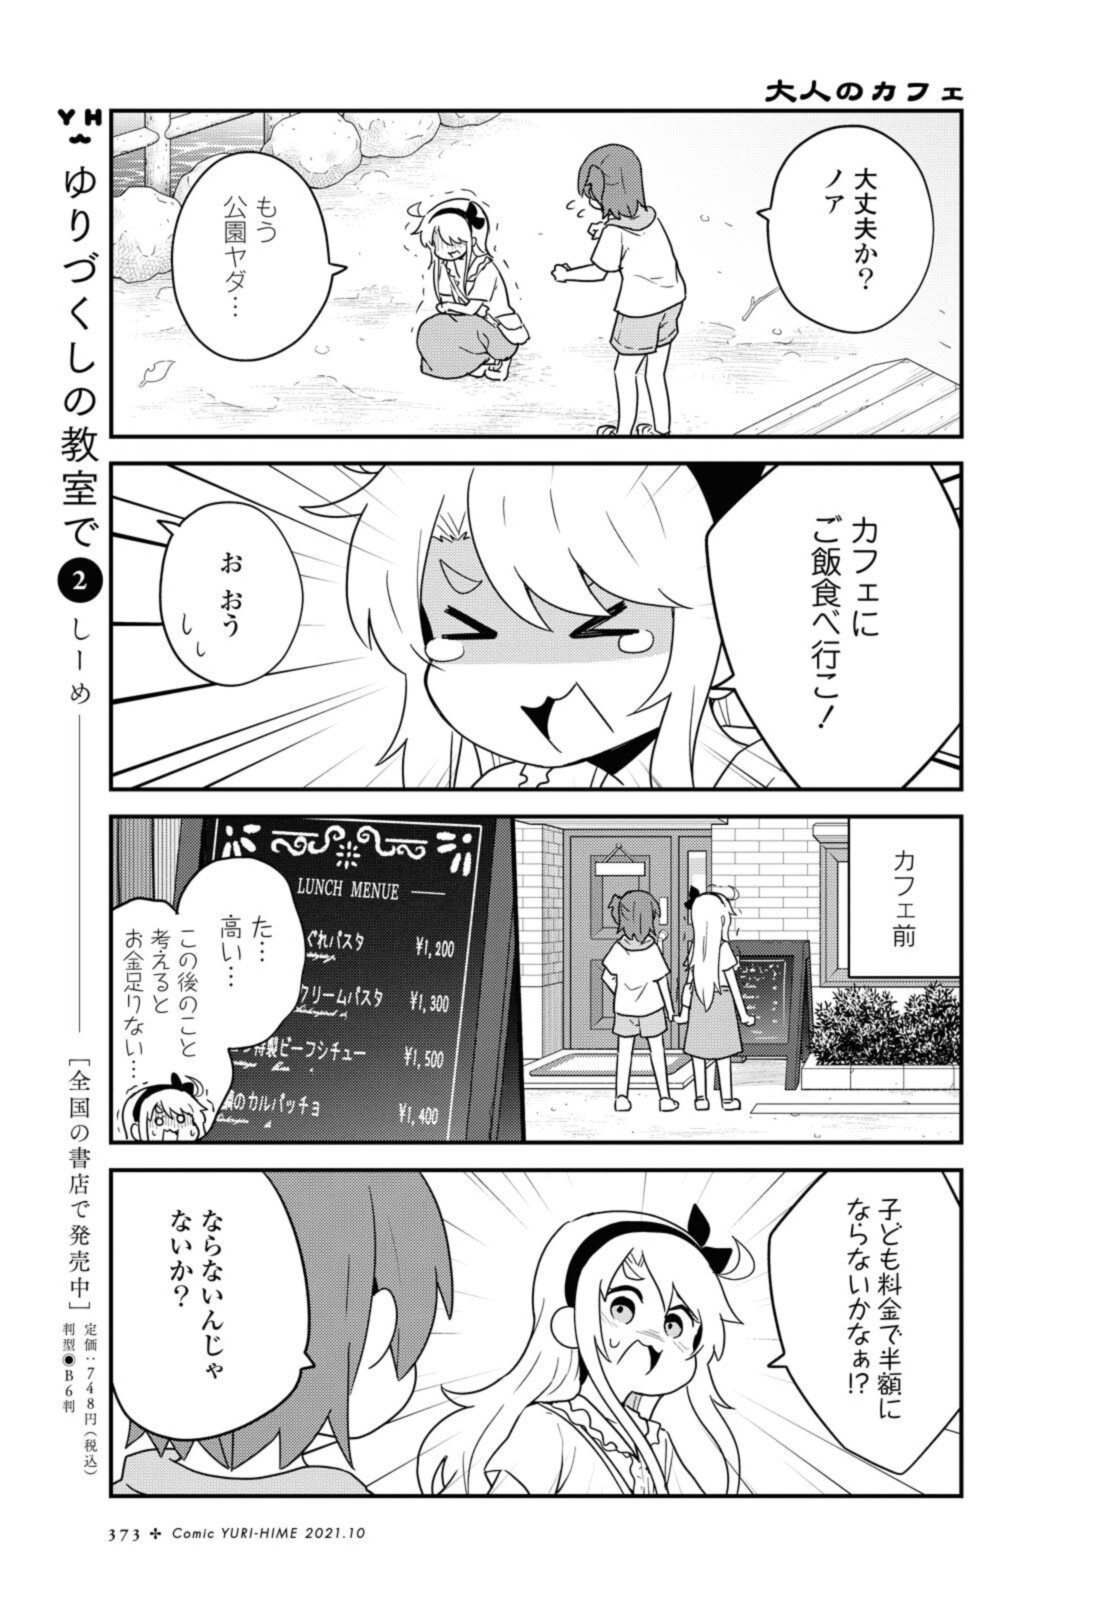 Wataten! An Angel Flew Down to Me 私に天使が舞い降りた！ 第86.2話 - Page 2